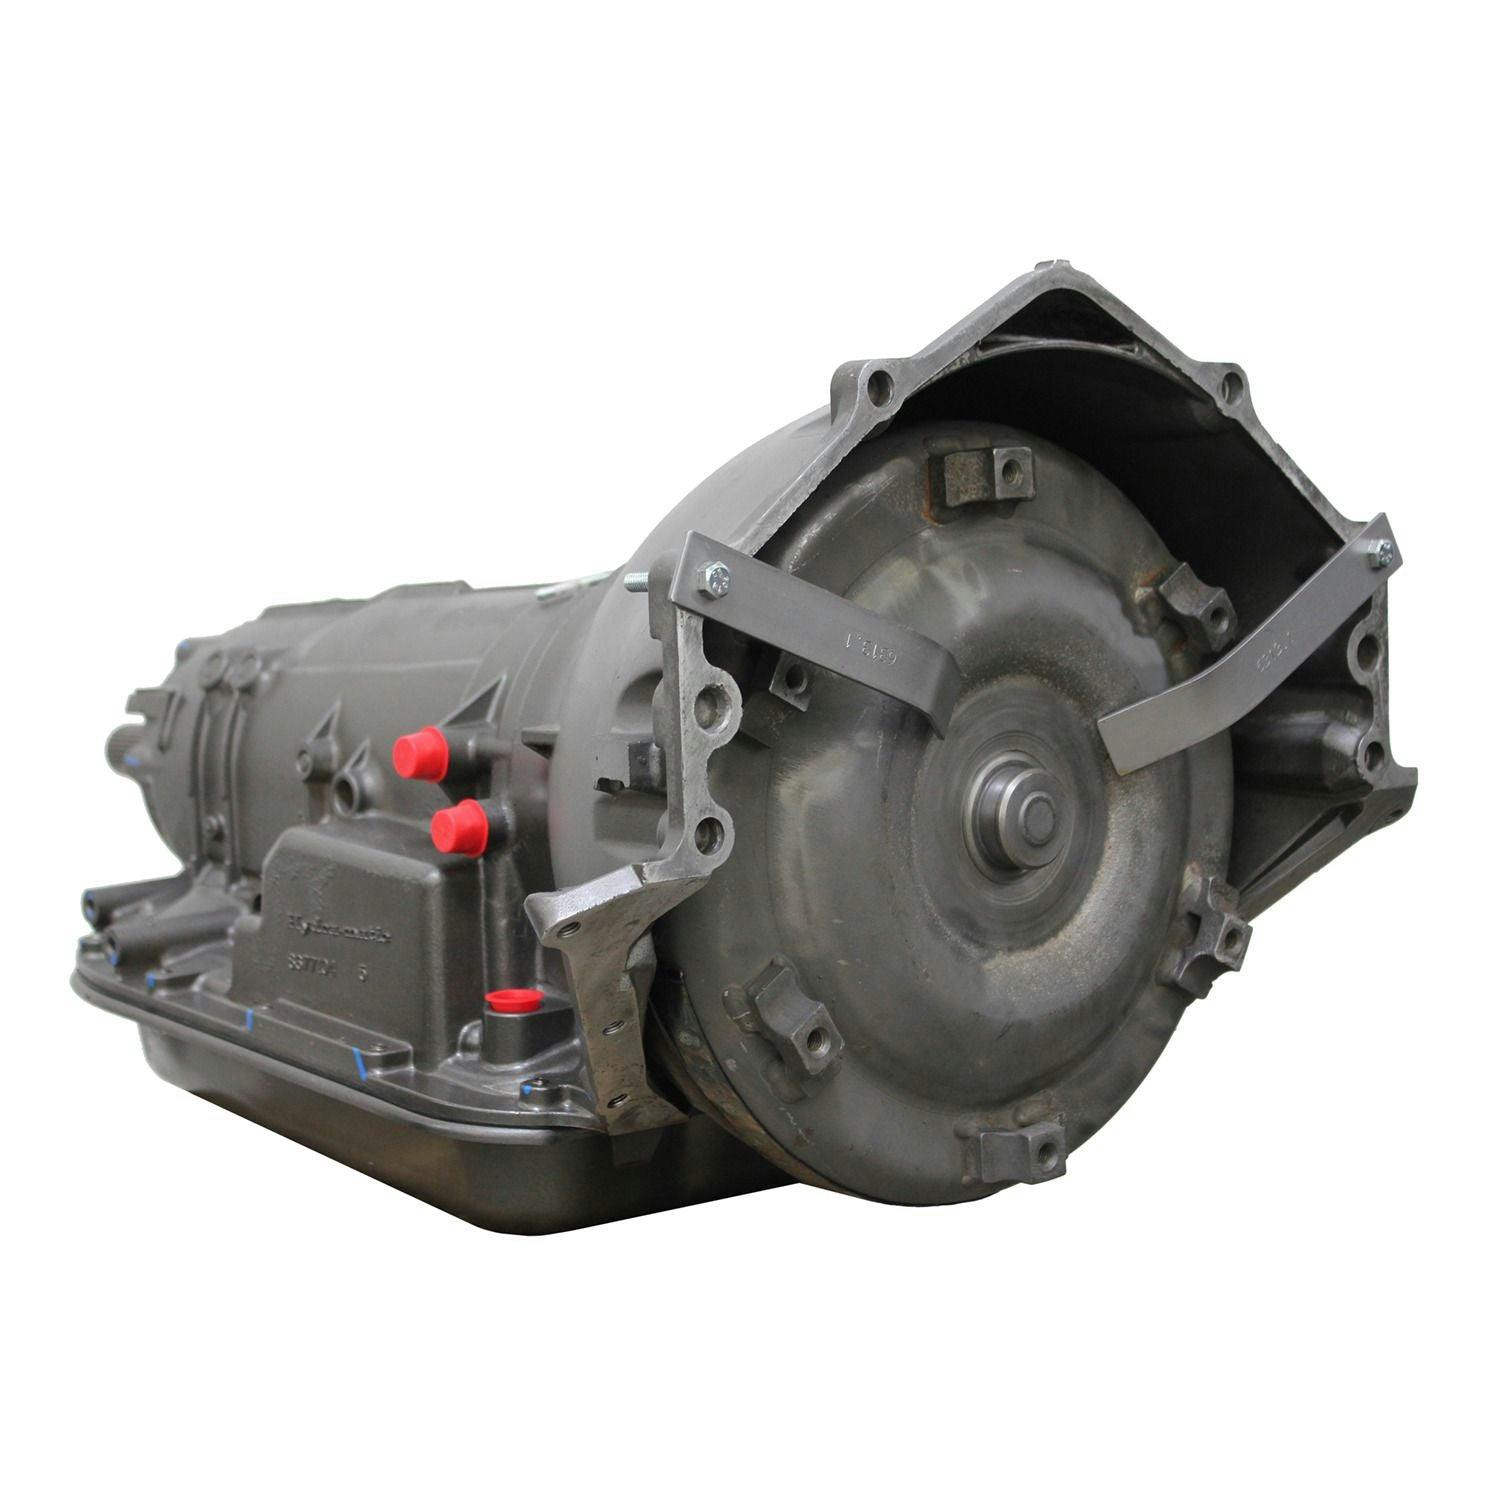 Automatic Transmission for 1996 Chevrolet P30 RWD with 6.5L V8 Engine